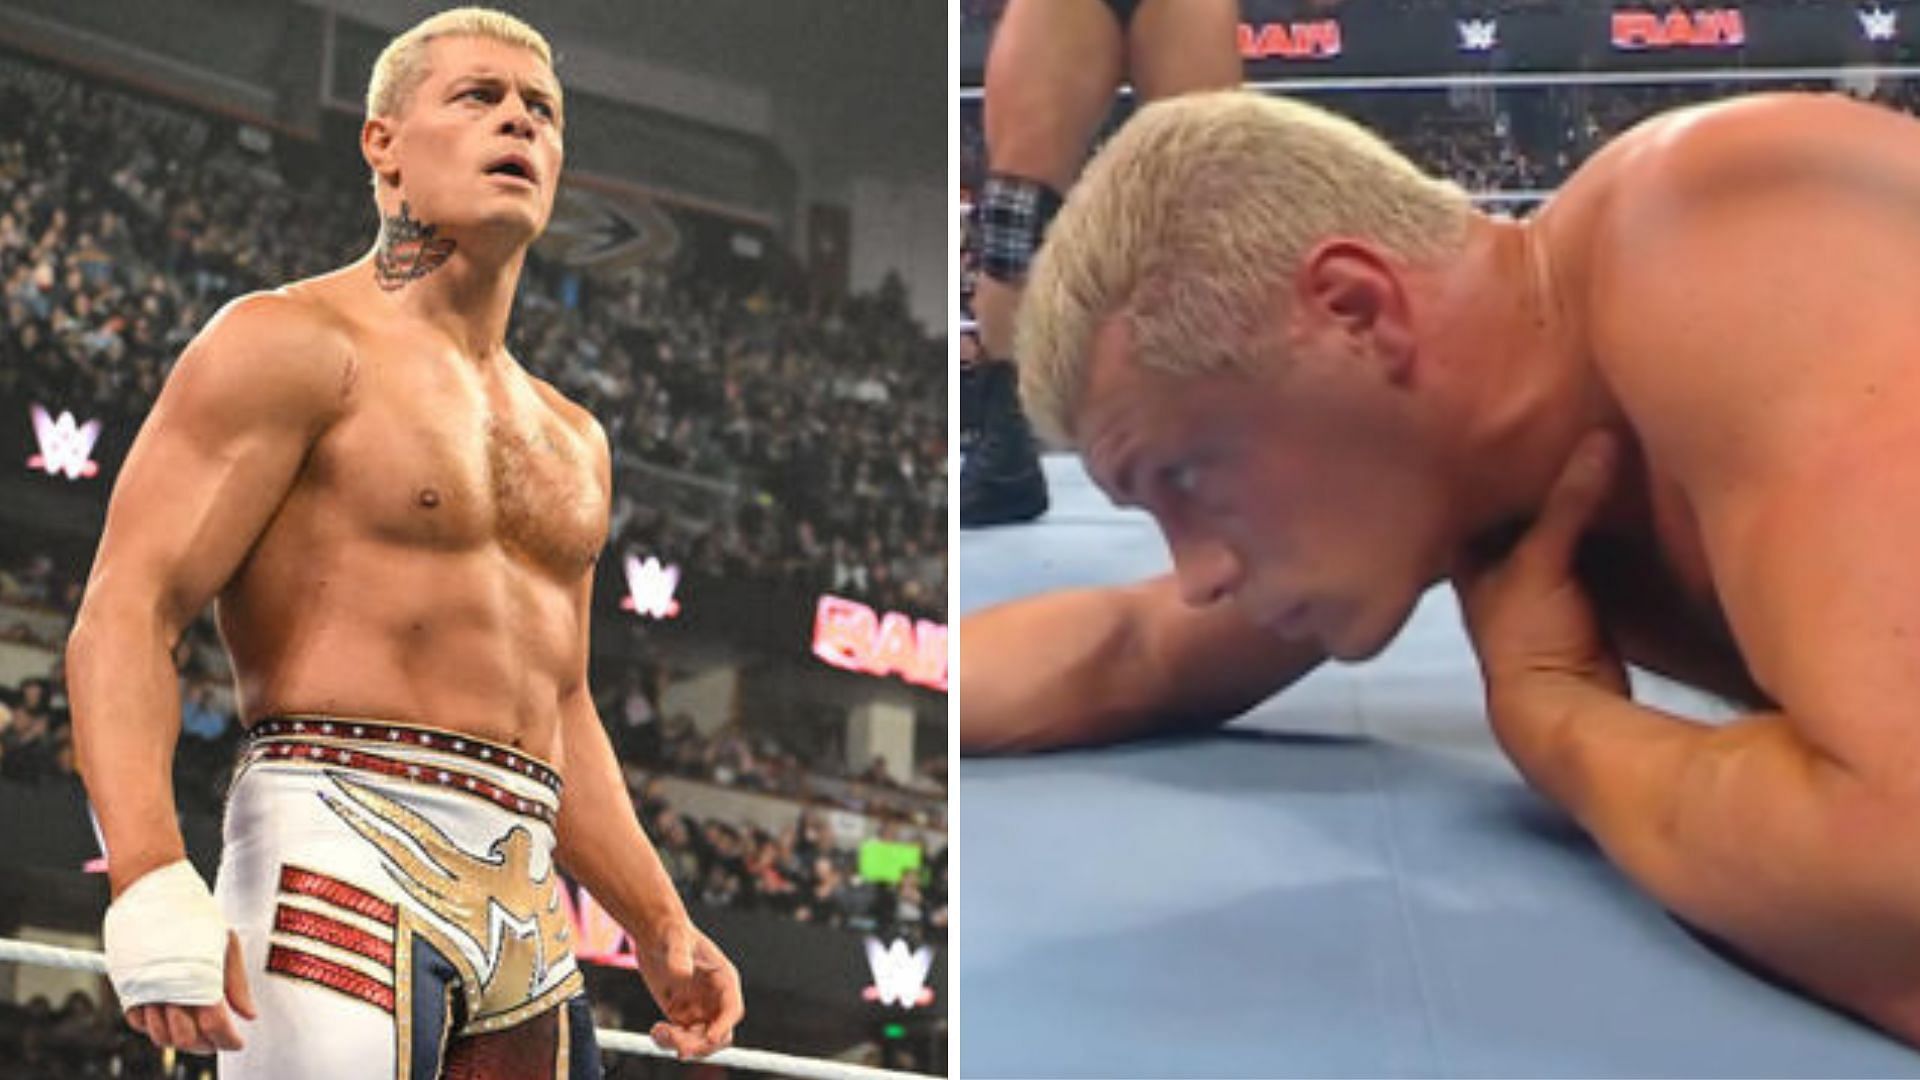 Cody Rhodes is a former Intercontinental Champion [Image credits: wwe.com and star